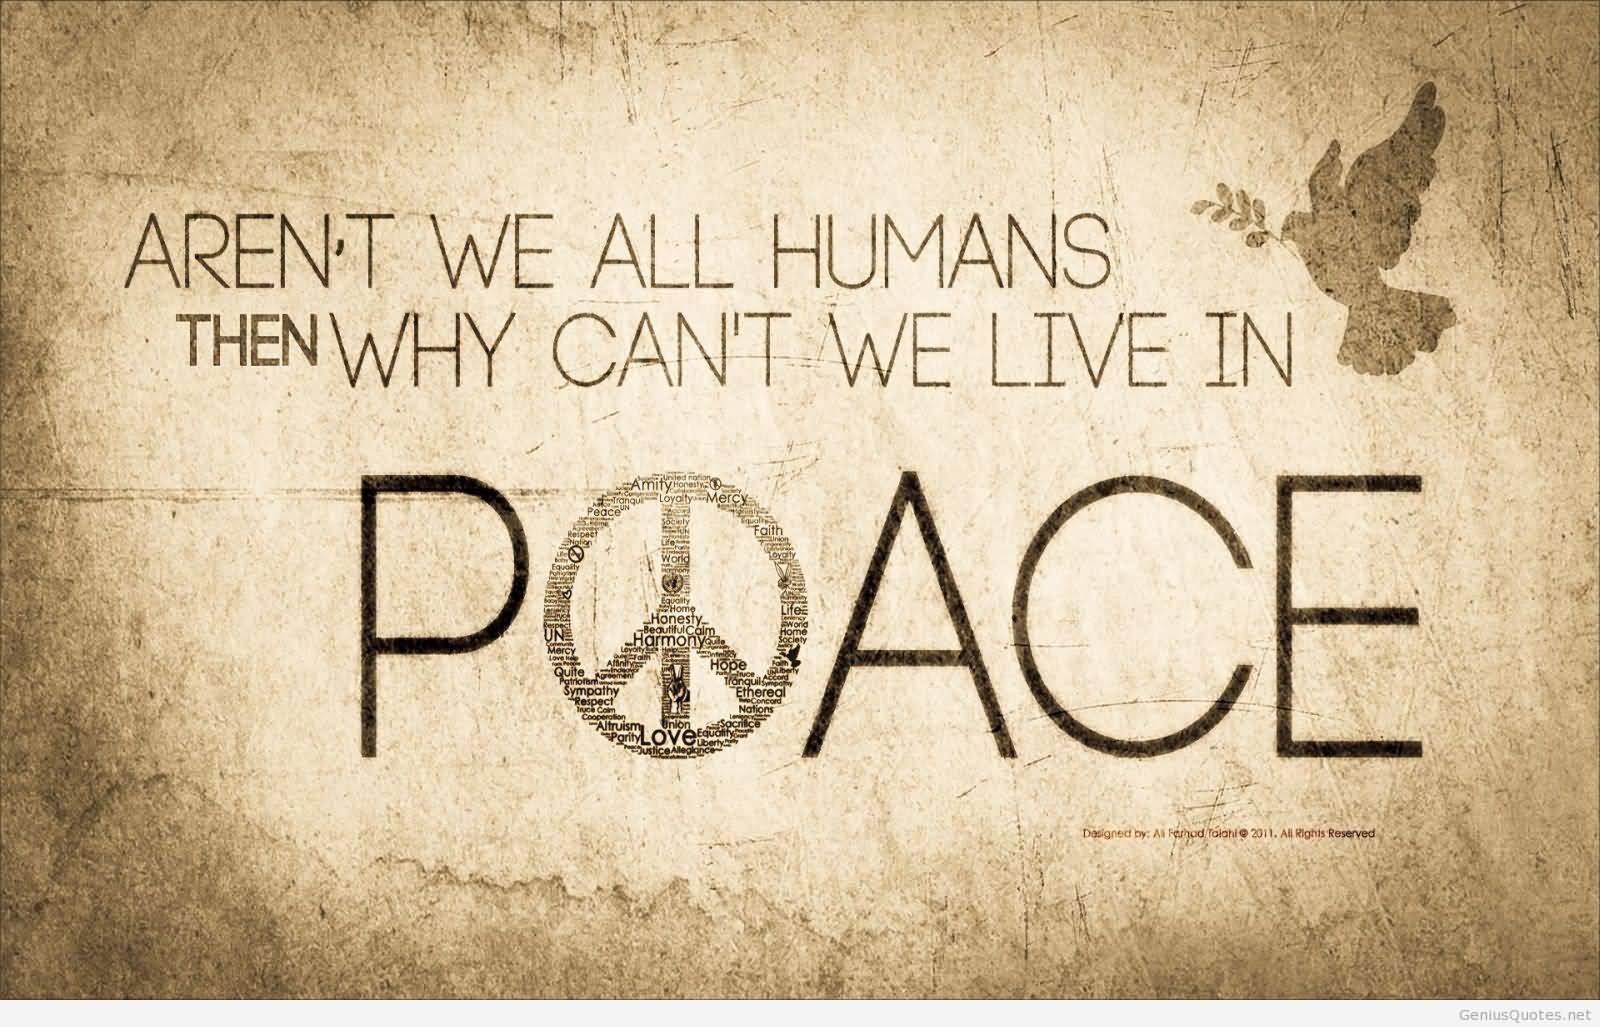 Aren't We All Humans Then Why Can't We Live in Peace